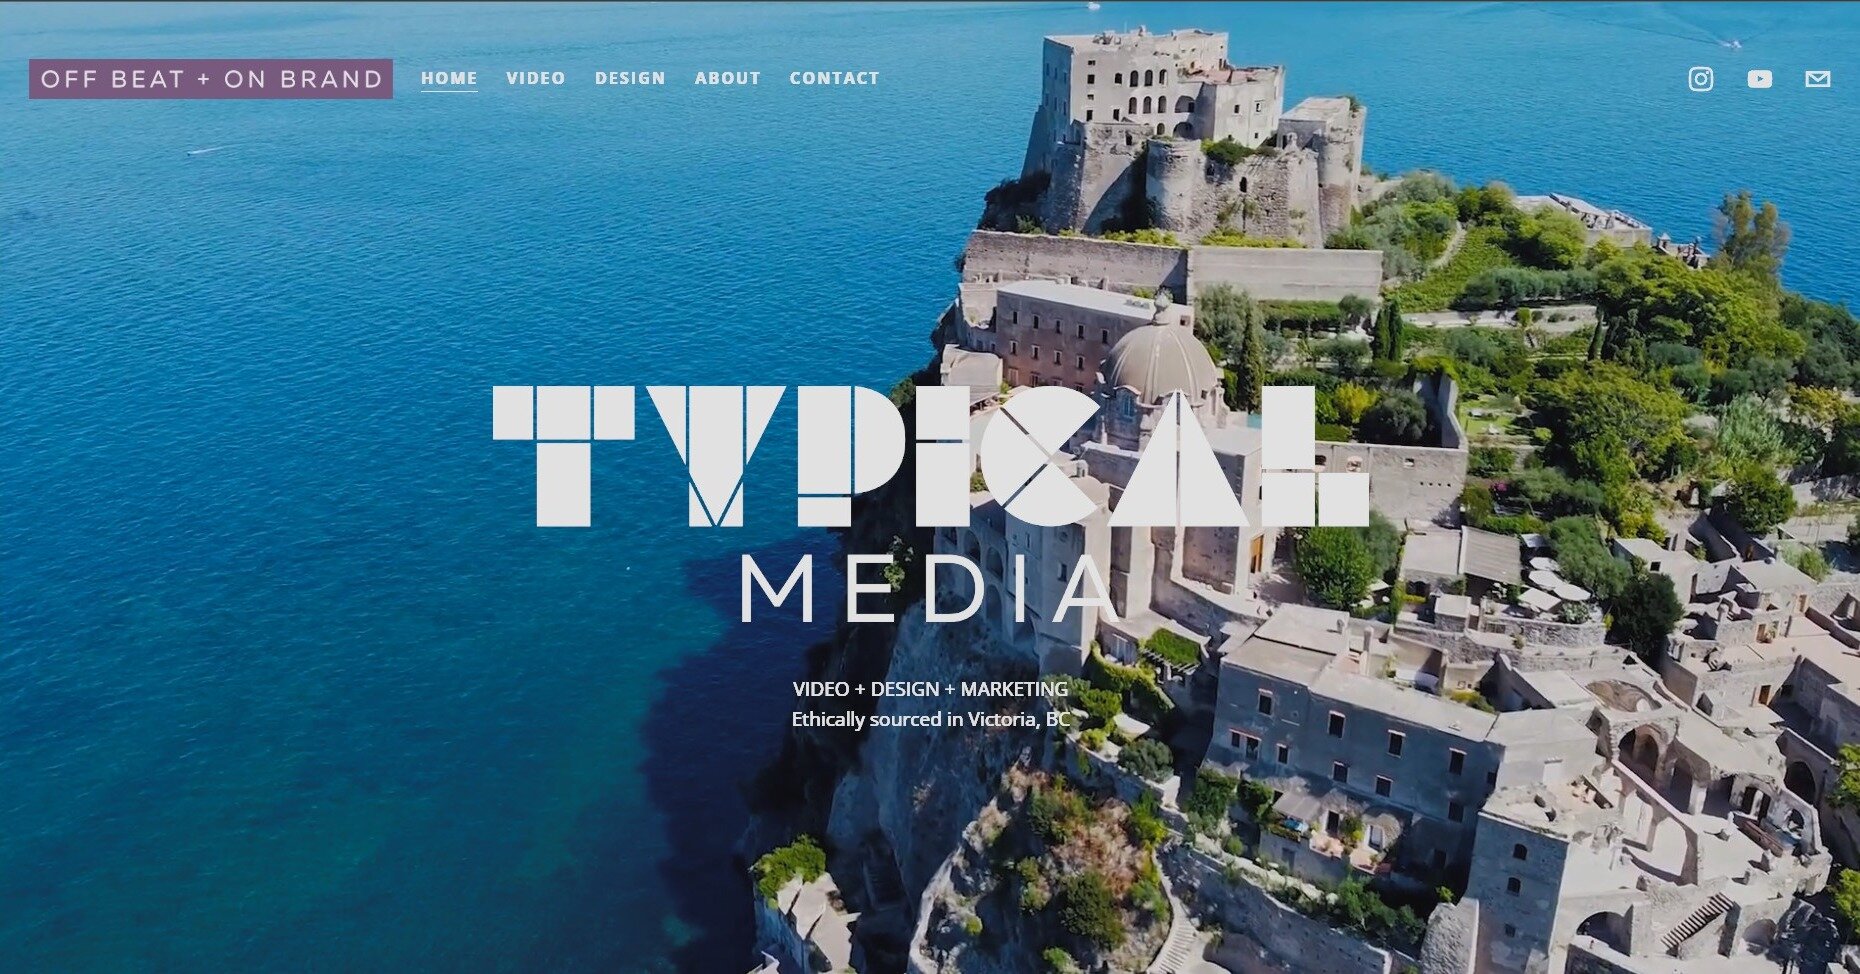 New 👏 Website 👏 Is 👏 Live!

We took our sweet time updating this, but it's we'll worth the wait! Head on over to www.typical.media and take a look at all our hard work!